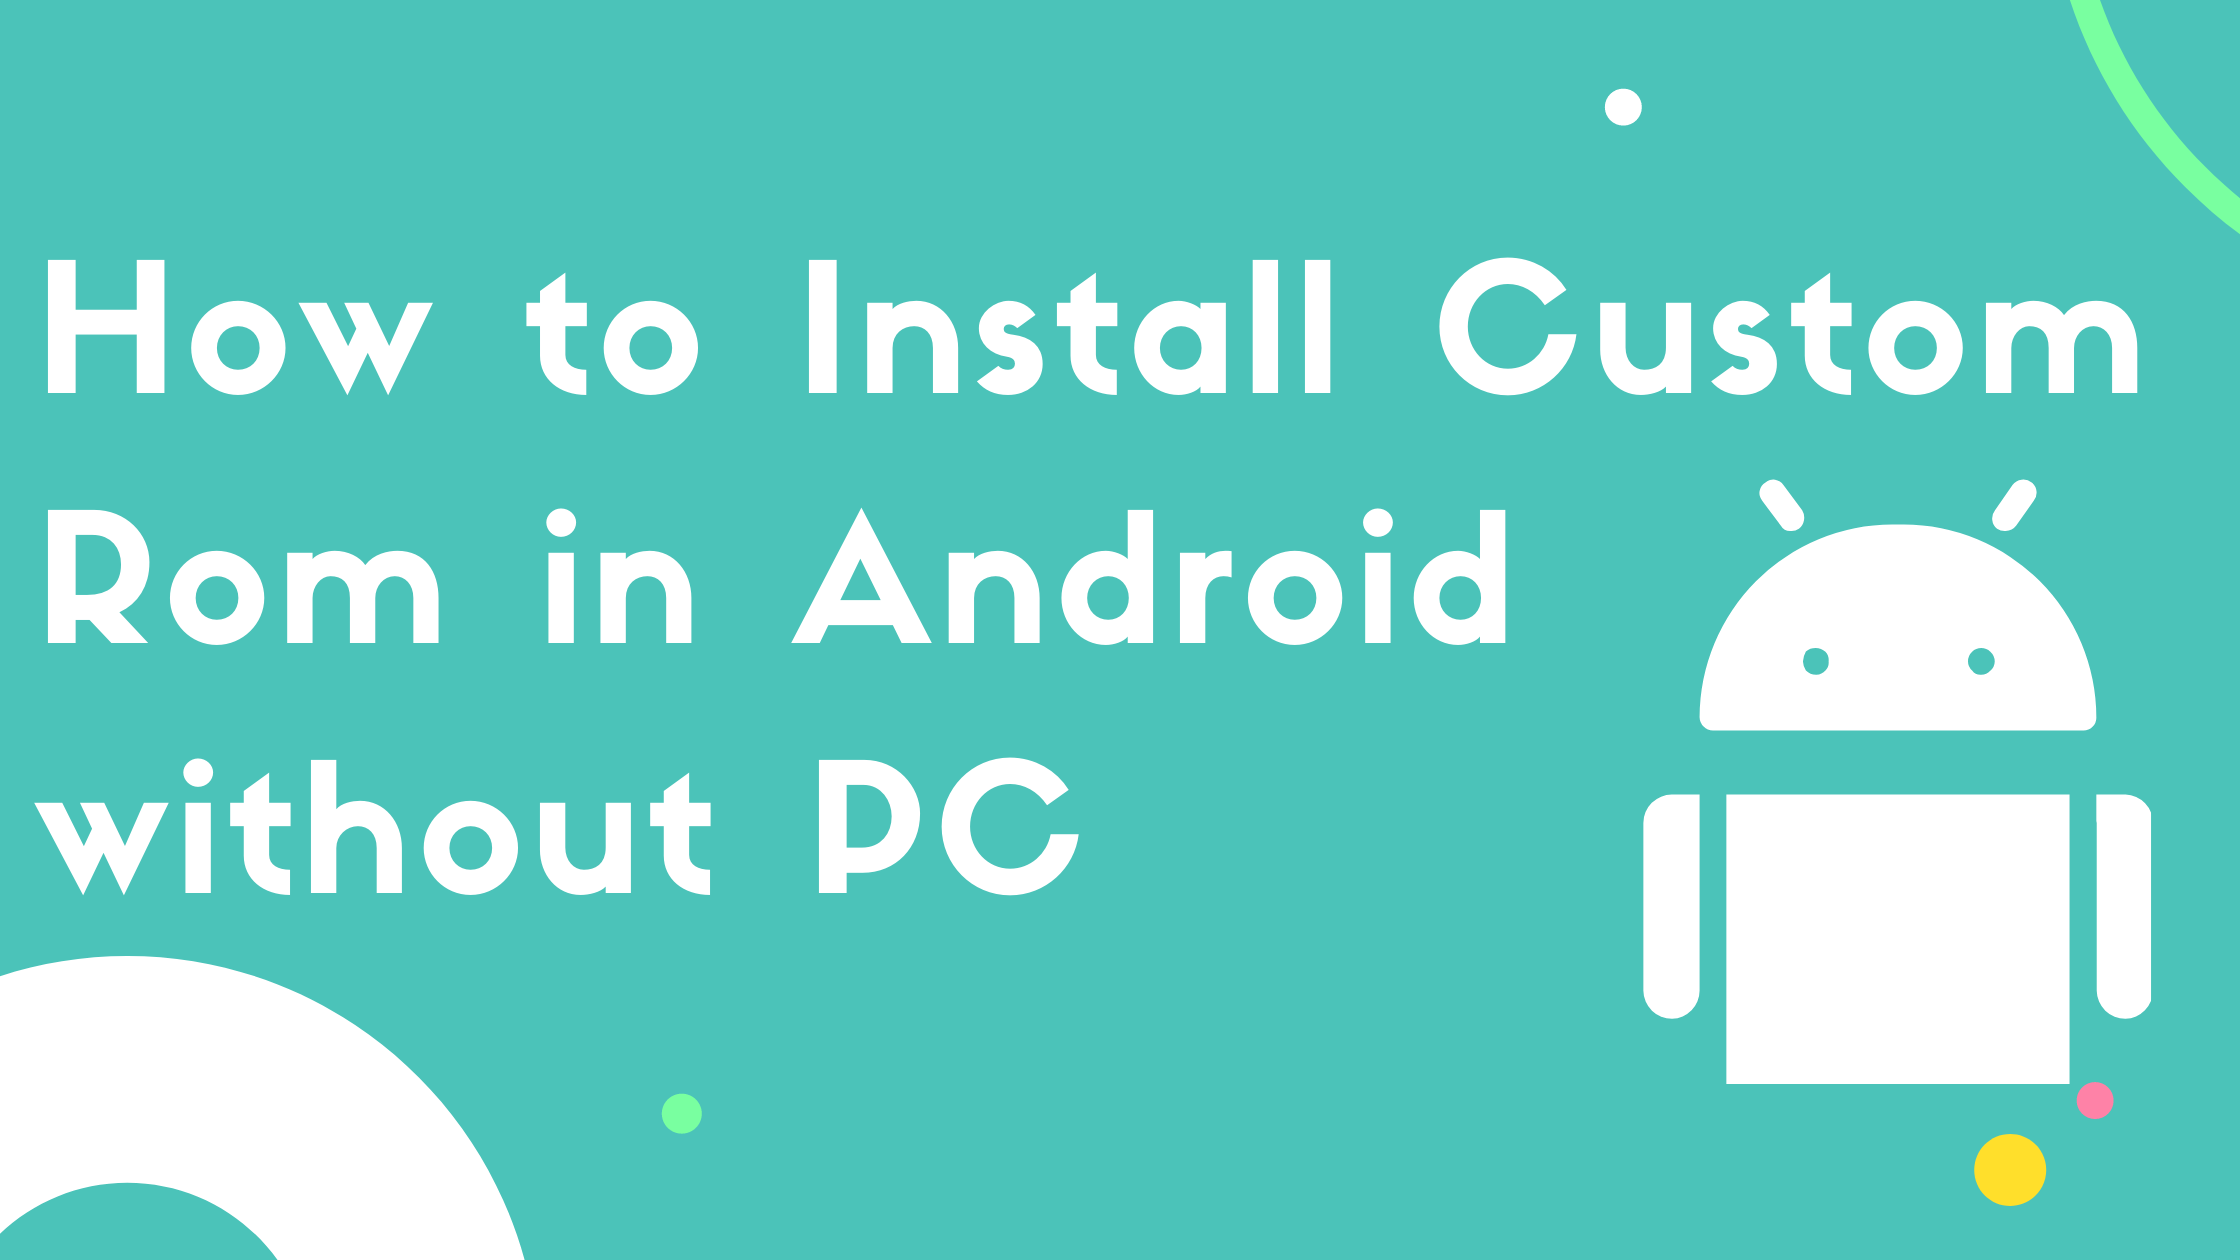 install custom rom on android without PC